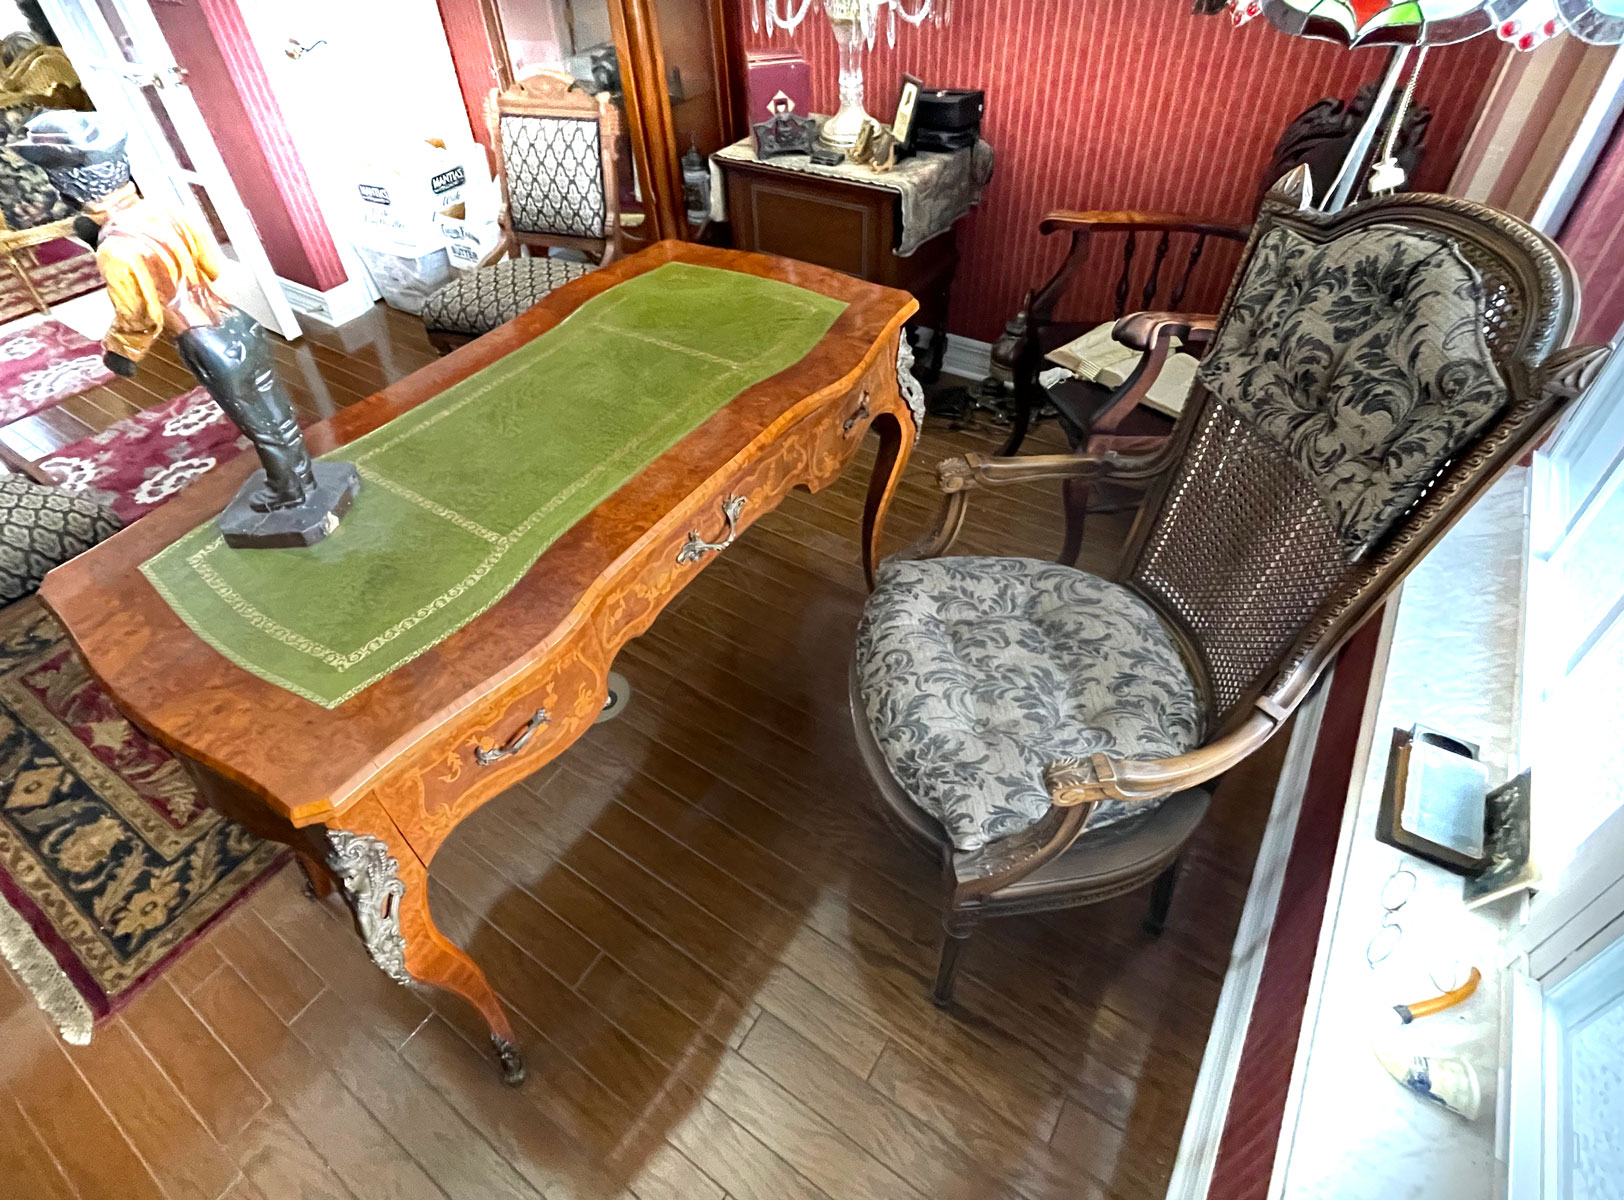 INLAID FRENCH DESK WITH CANE WORK 274b75